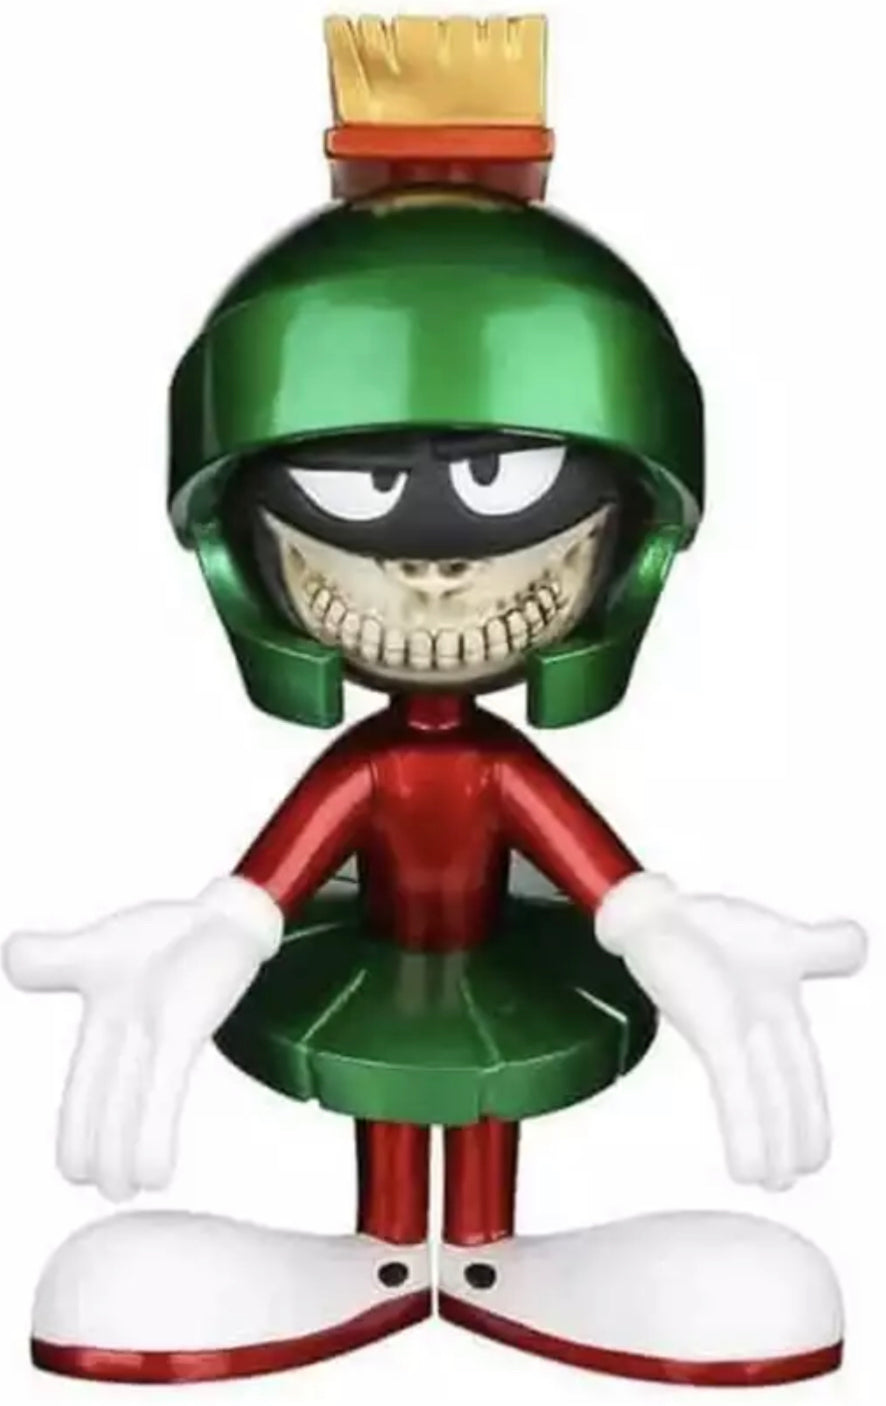 Ron English “Marvin The Martian”